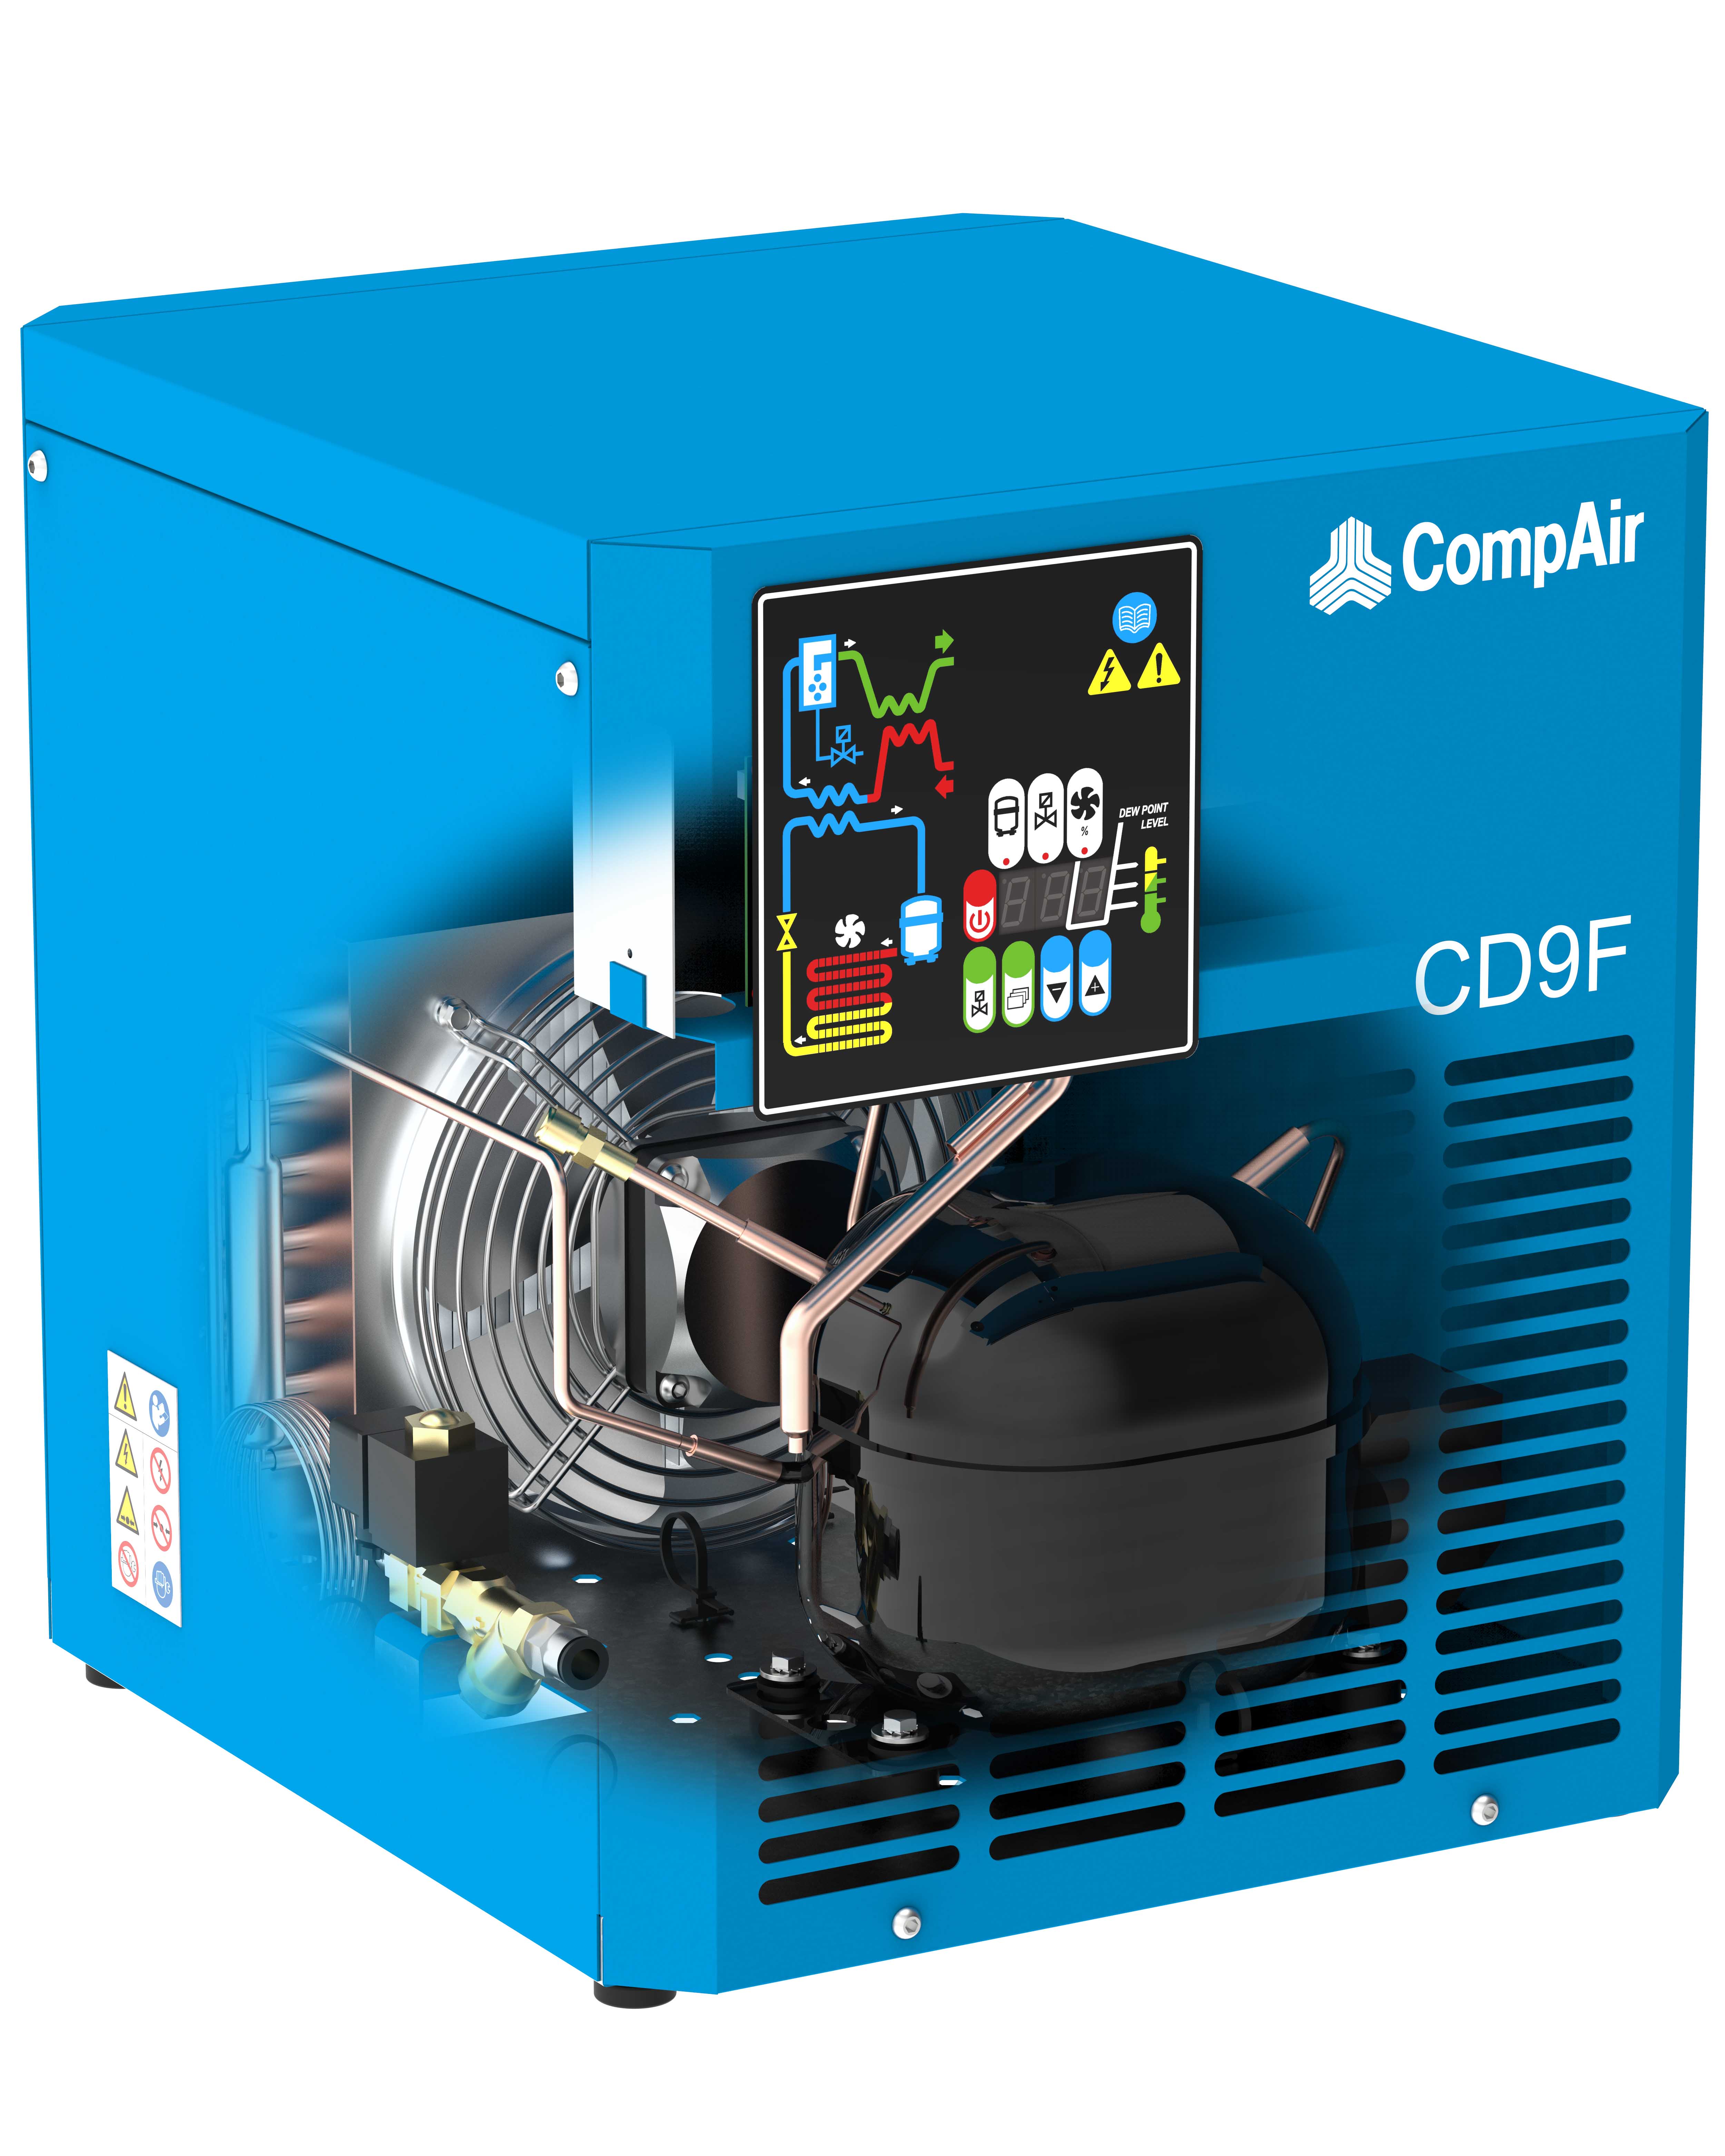 The new CD refrigerant dryer range from CompAir offers flow rates of to 191.67 m3/min.